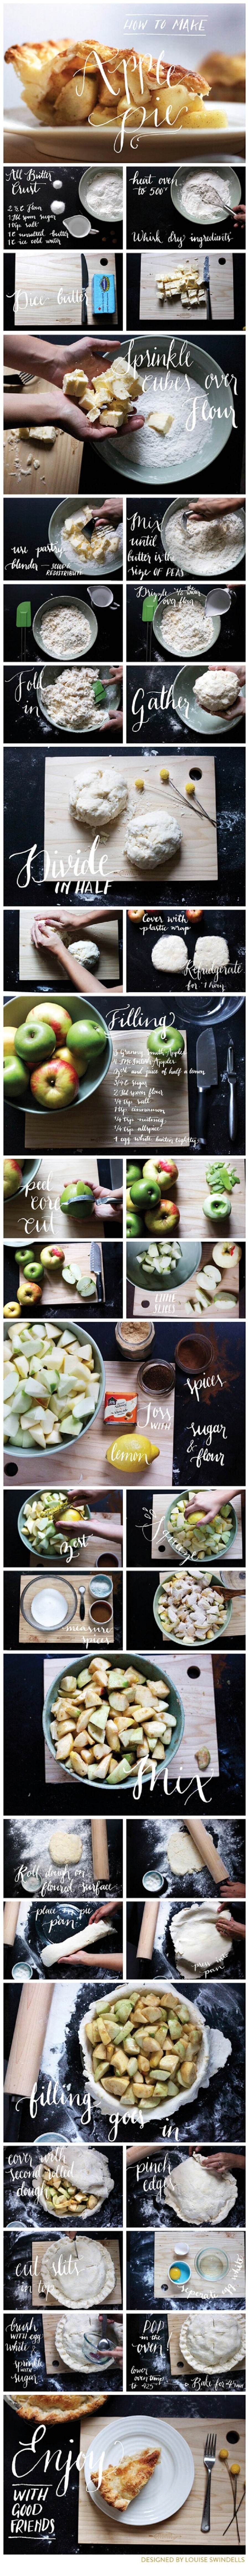 17. Learn how to make an apple pie.